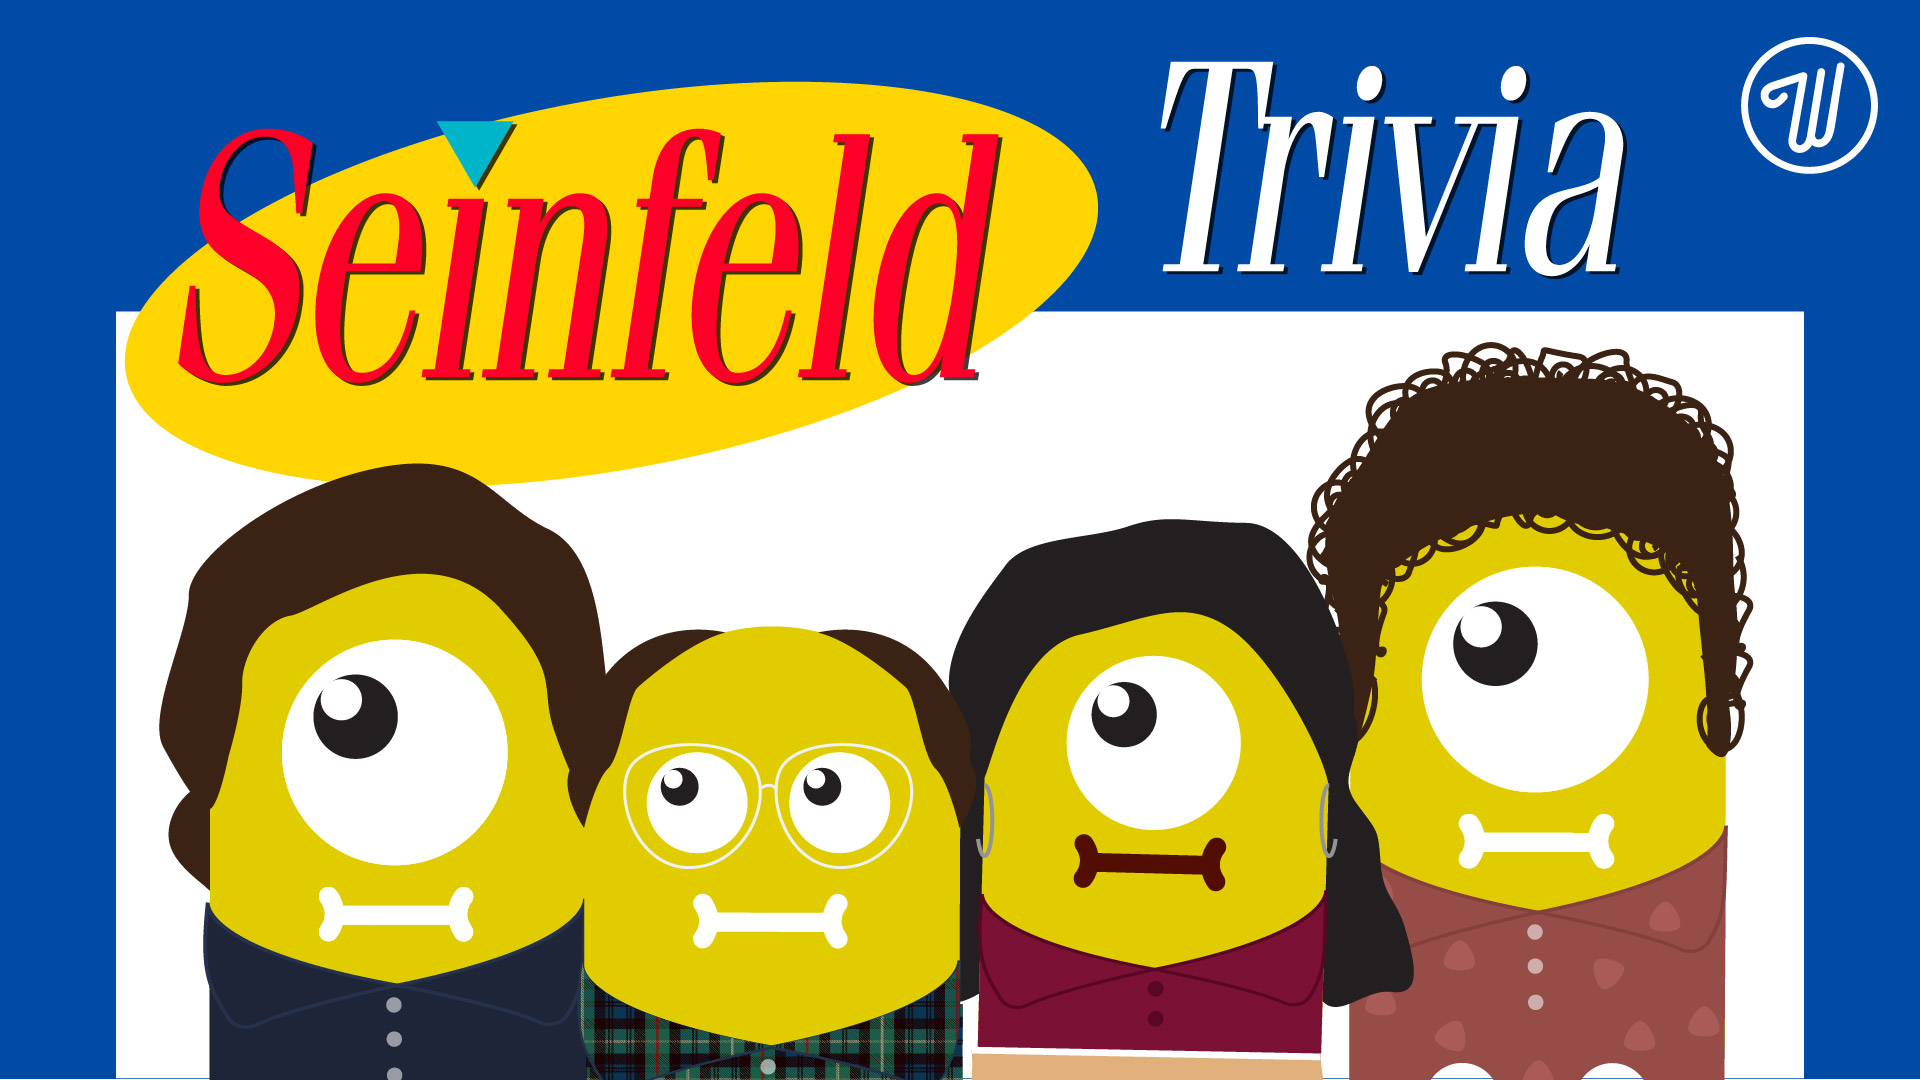 Seinfeld trivia night graphic with Seinfeld-themed aliens